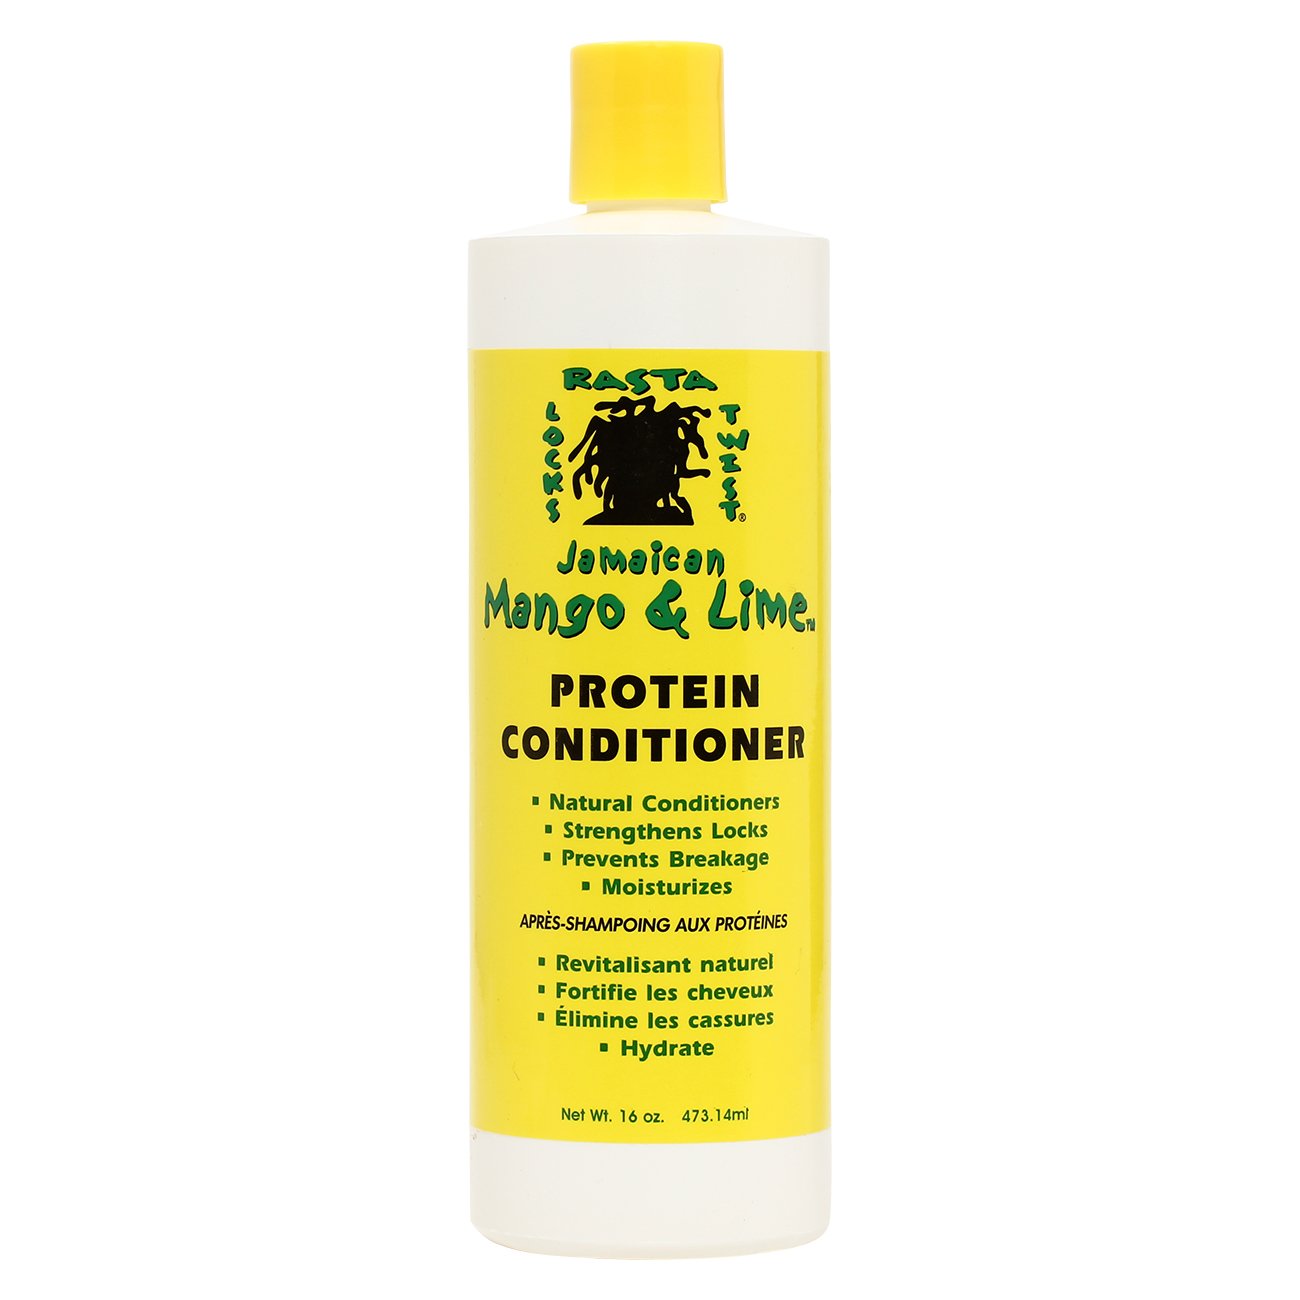 4th Ave Market: Jamaican Mango and Lime Protein Conditioner, 16 Ounce